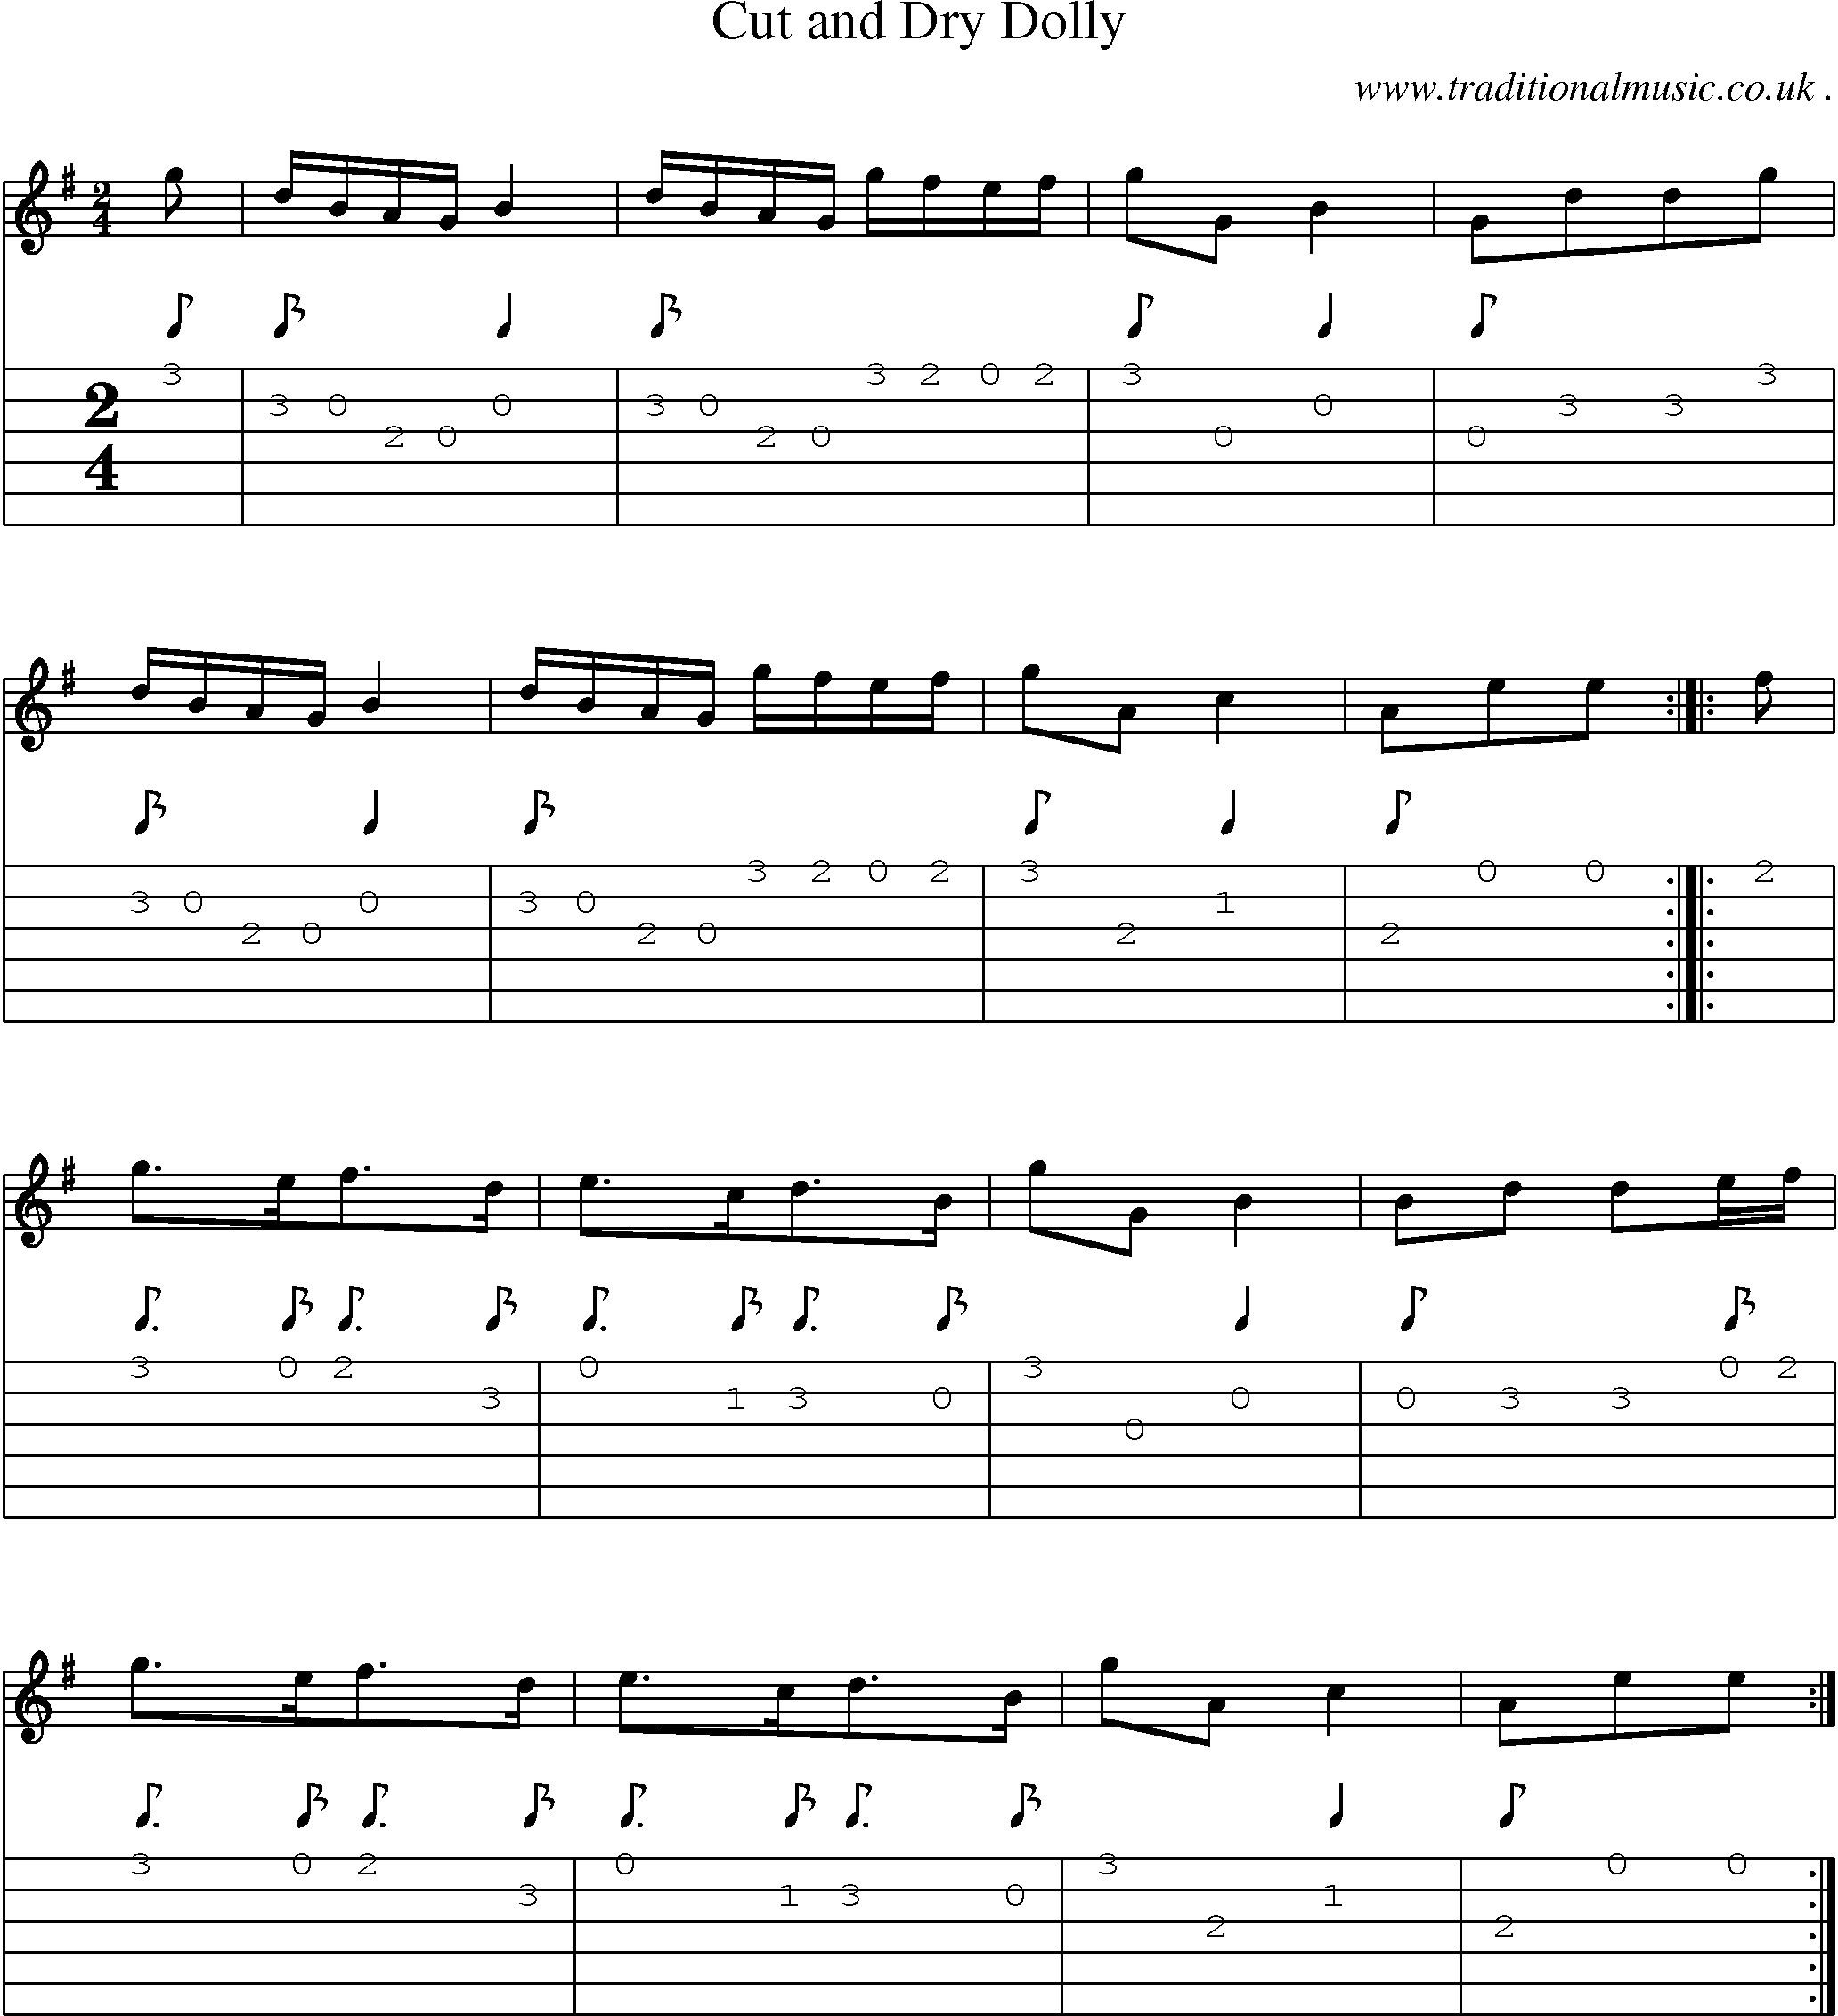 Sheet-Music and Guitar Tabs for Cut And Dry Dolly